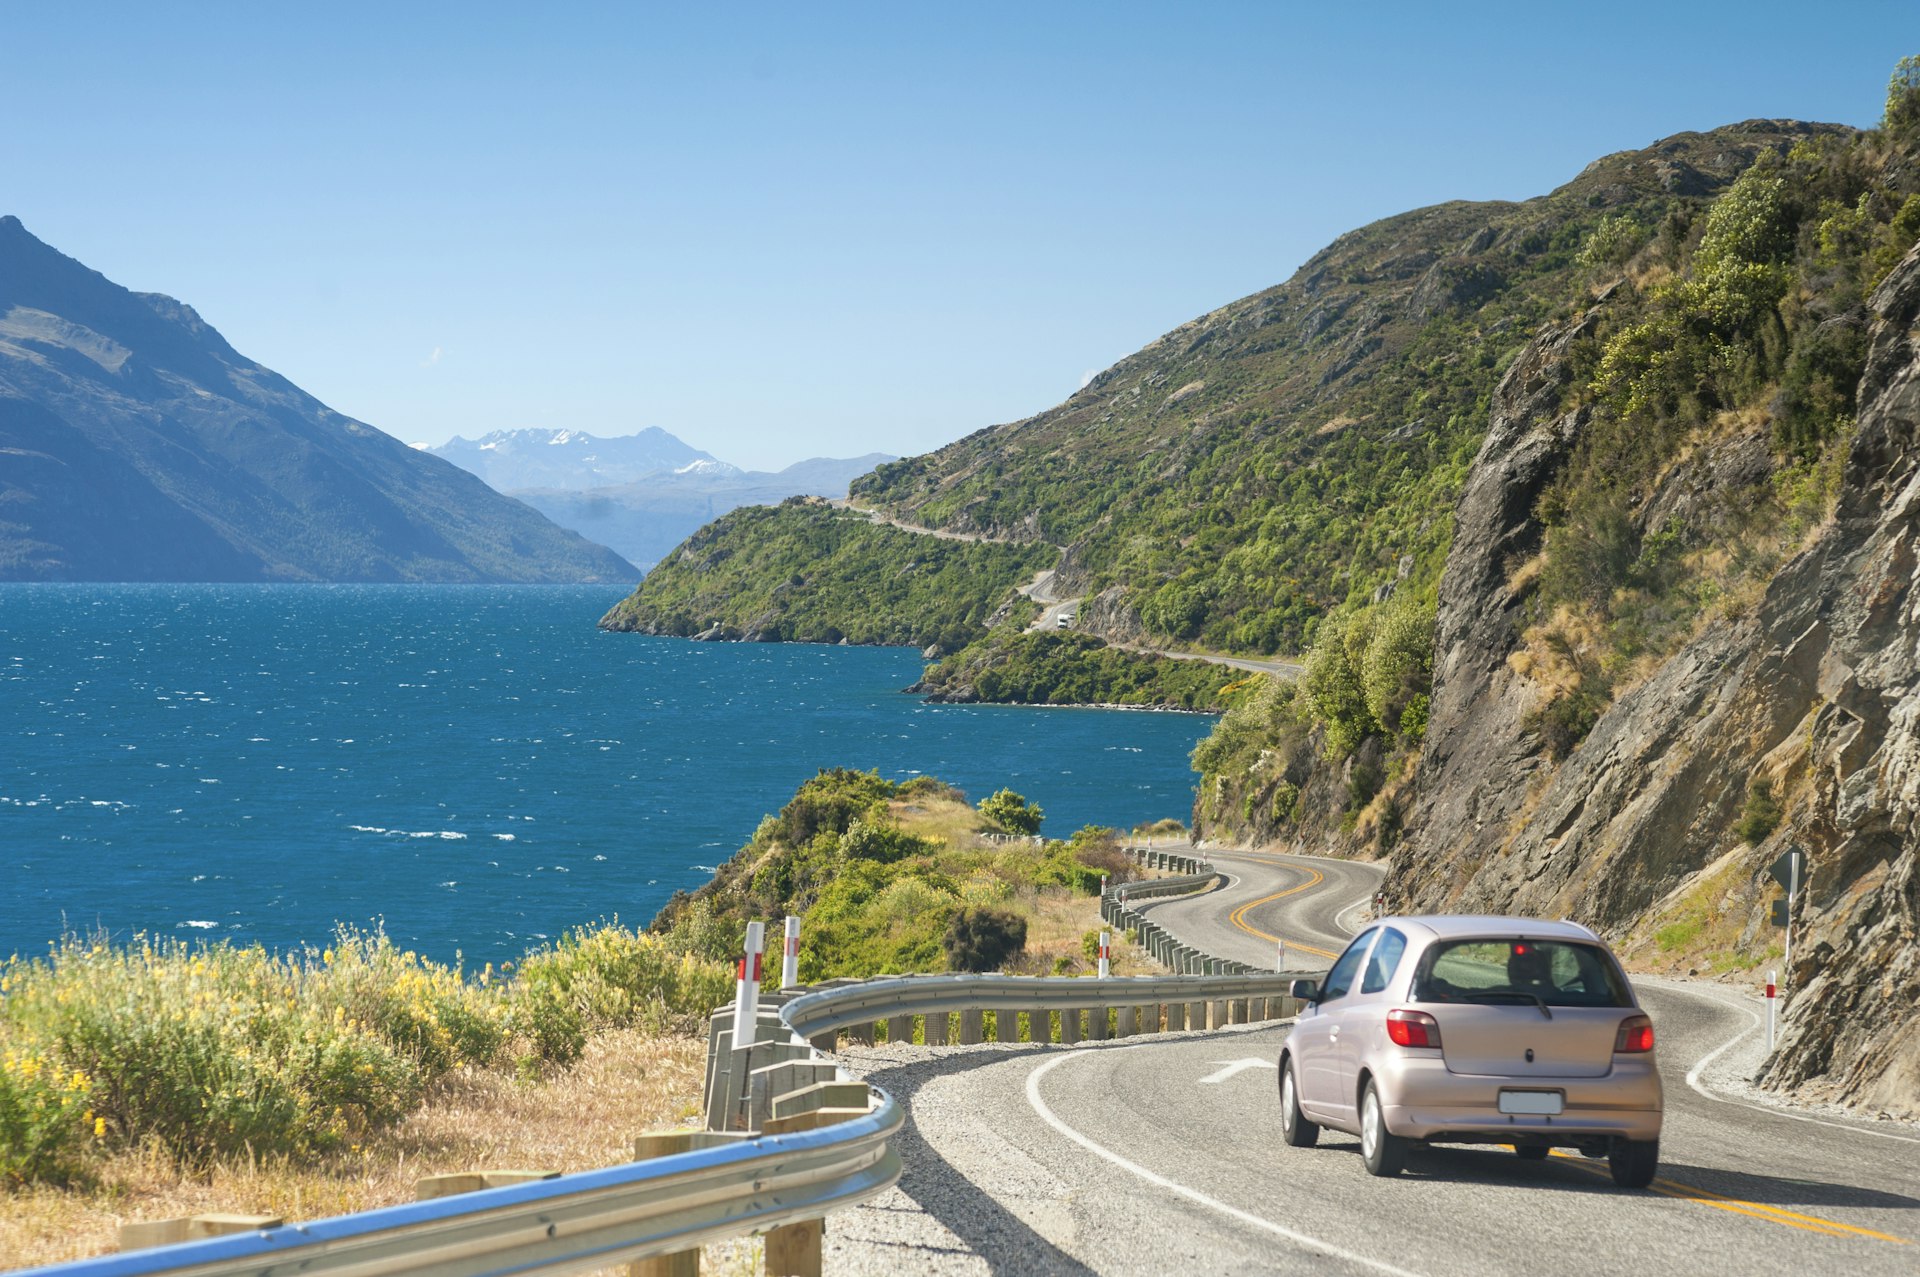 A car driving on a winding road with rocky peaks to one side and sparkling blue water to the other, on the way to Glenorchy, Queenstown, New Zealand. 